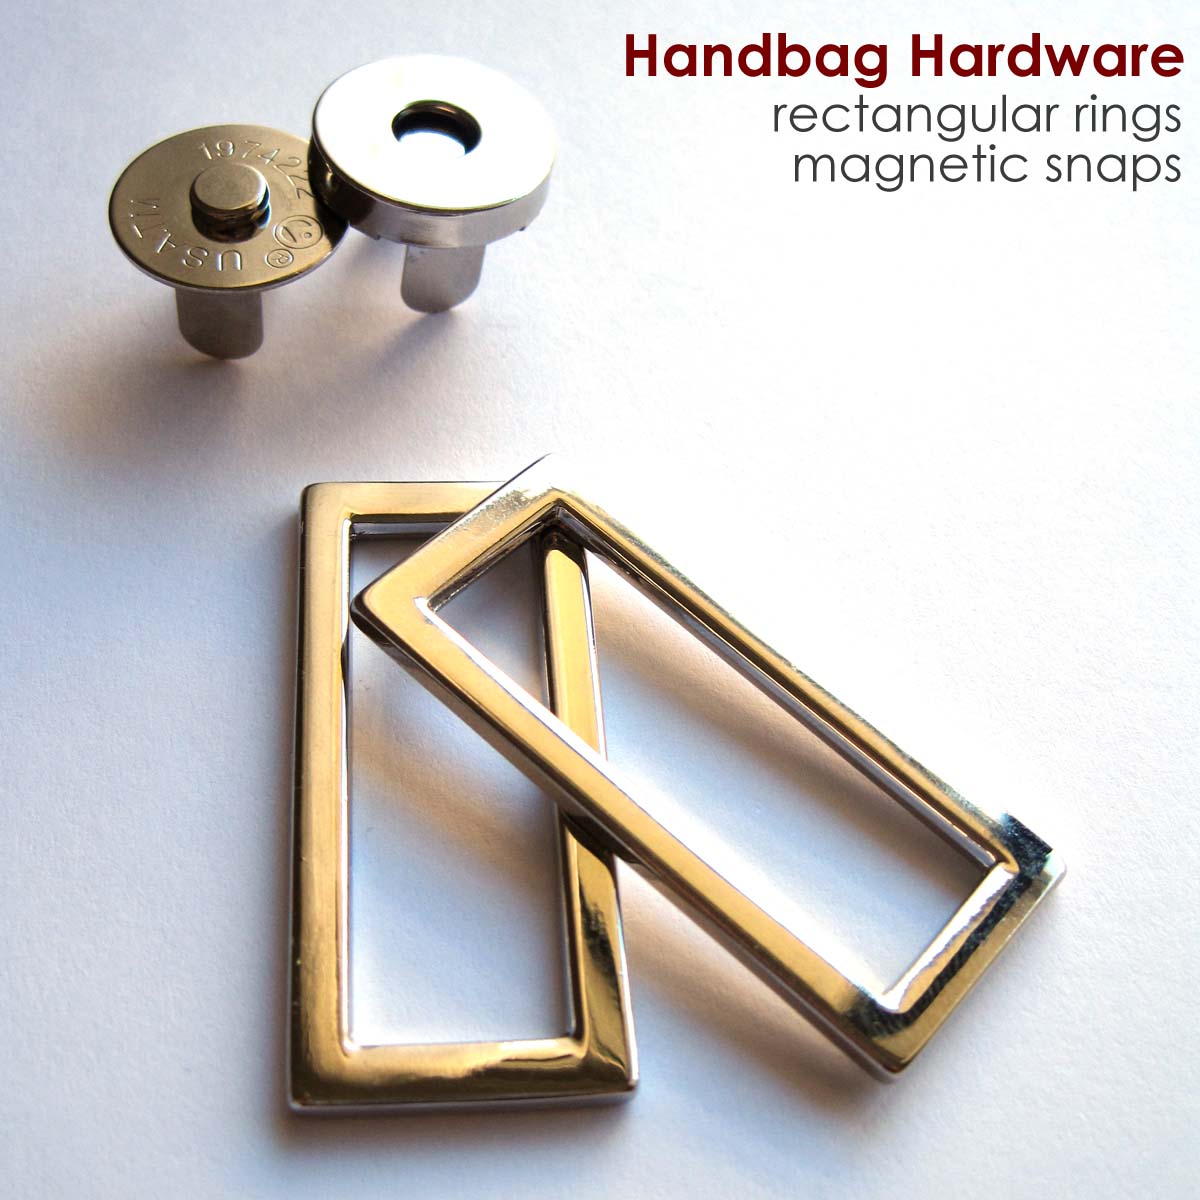 Hardware For Handbags. 50 Sets 18mm Silver Tone Magnetic Buckle Bag Button Purse Snap Closure ...